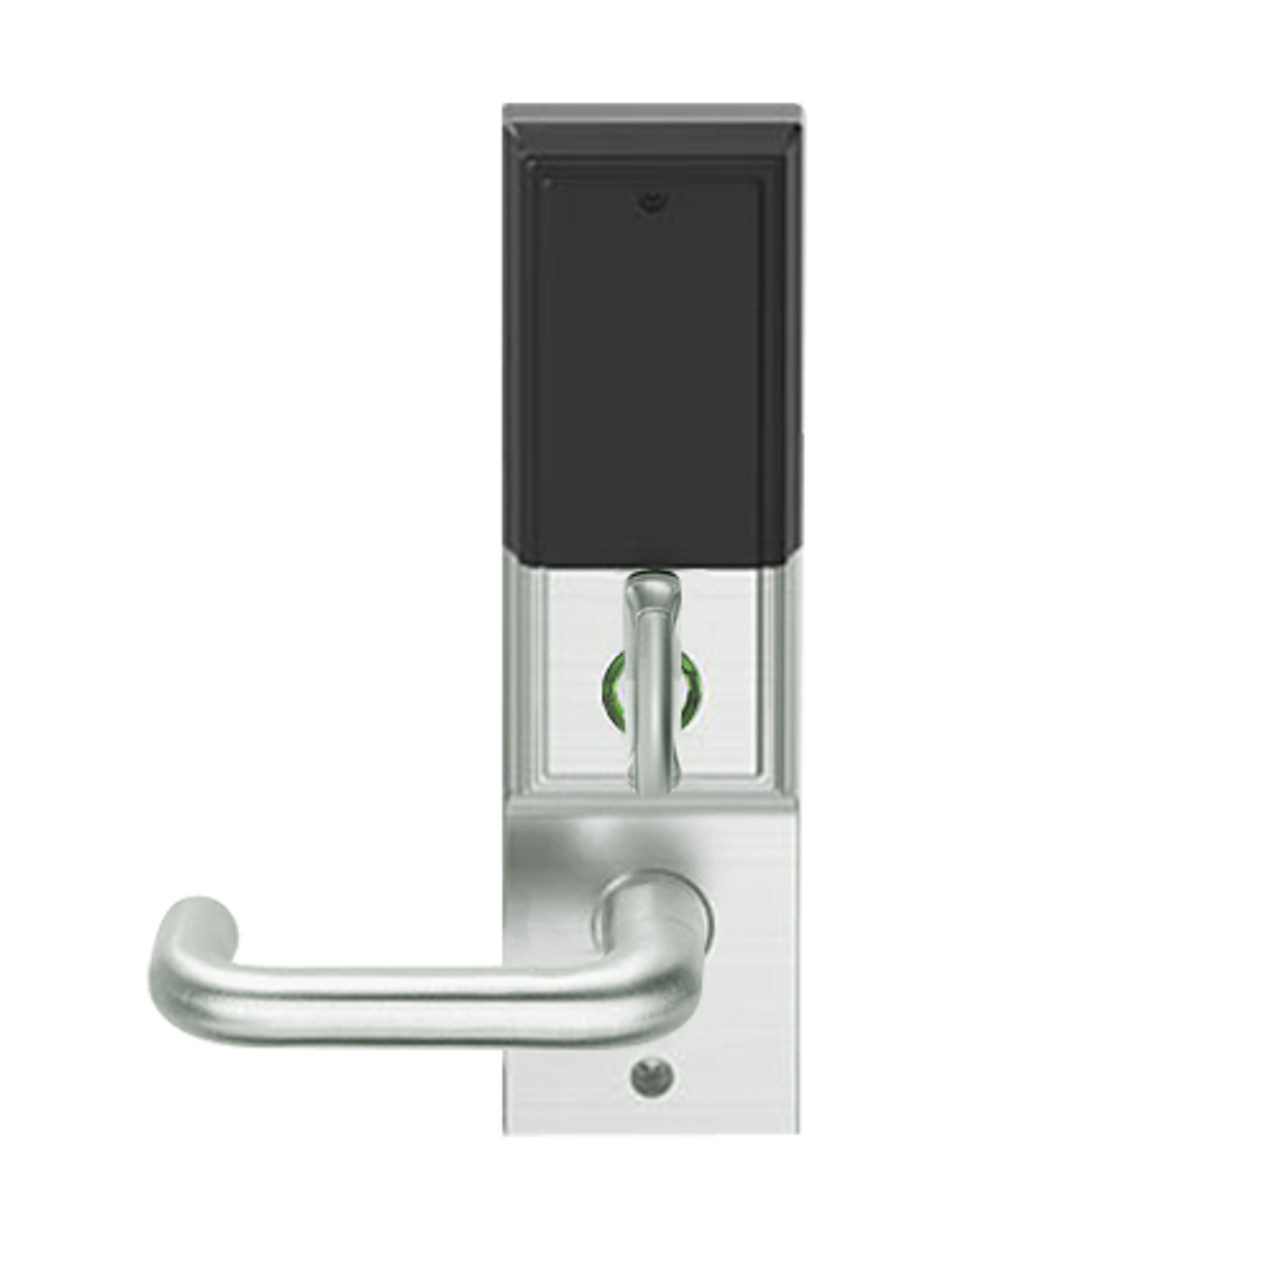 LEMD-ADD-L-03-619 Schlage Less Mortise Cylinder Privacy/Apartment Wireless Addison Mortise Deadbolt Lock with LED and Tubular Lever in Satin Nickel